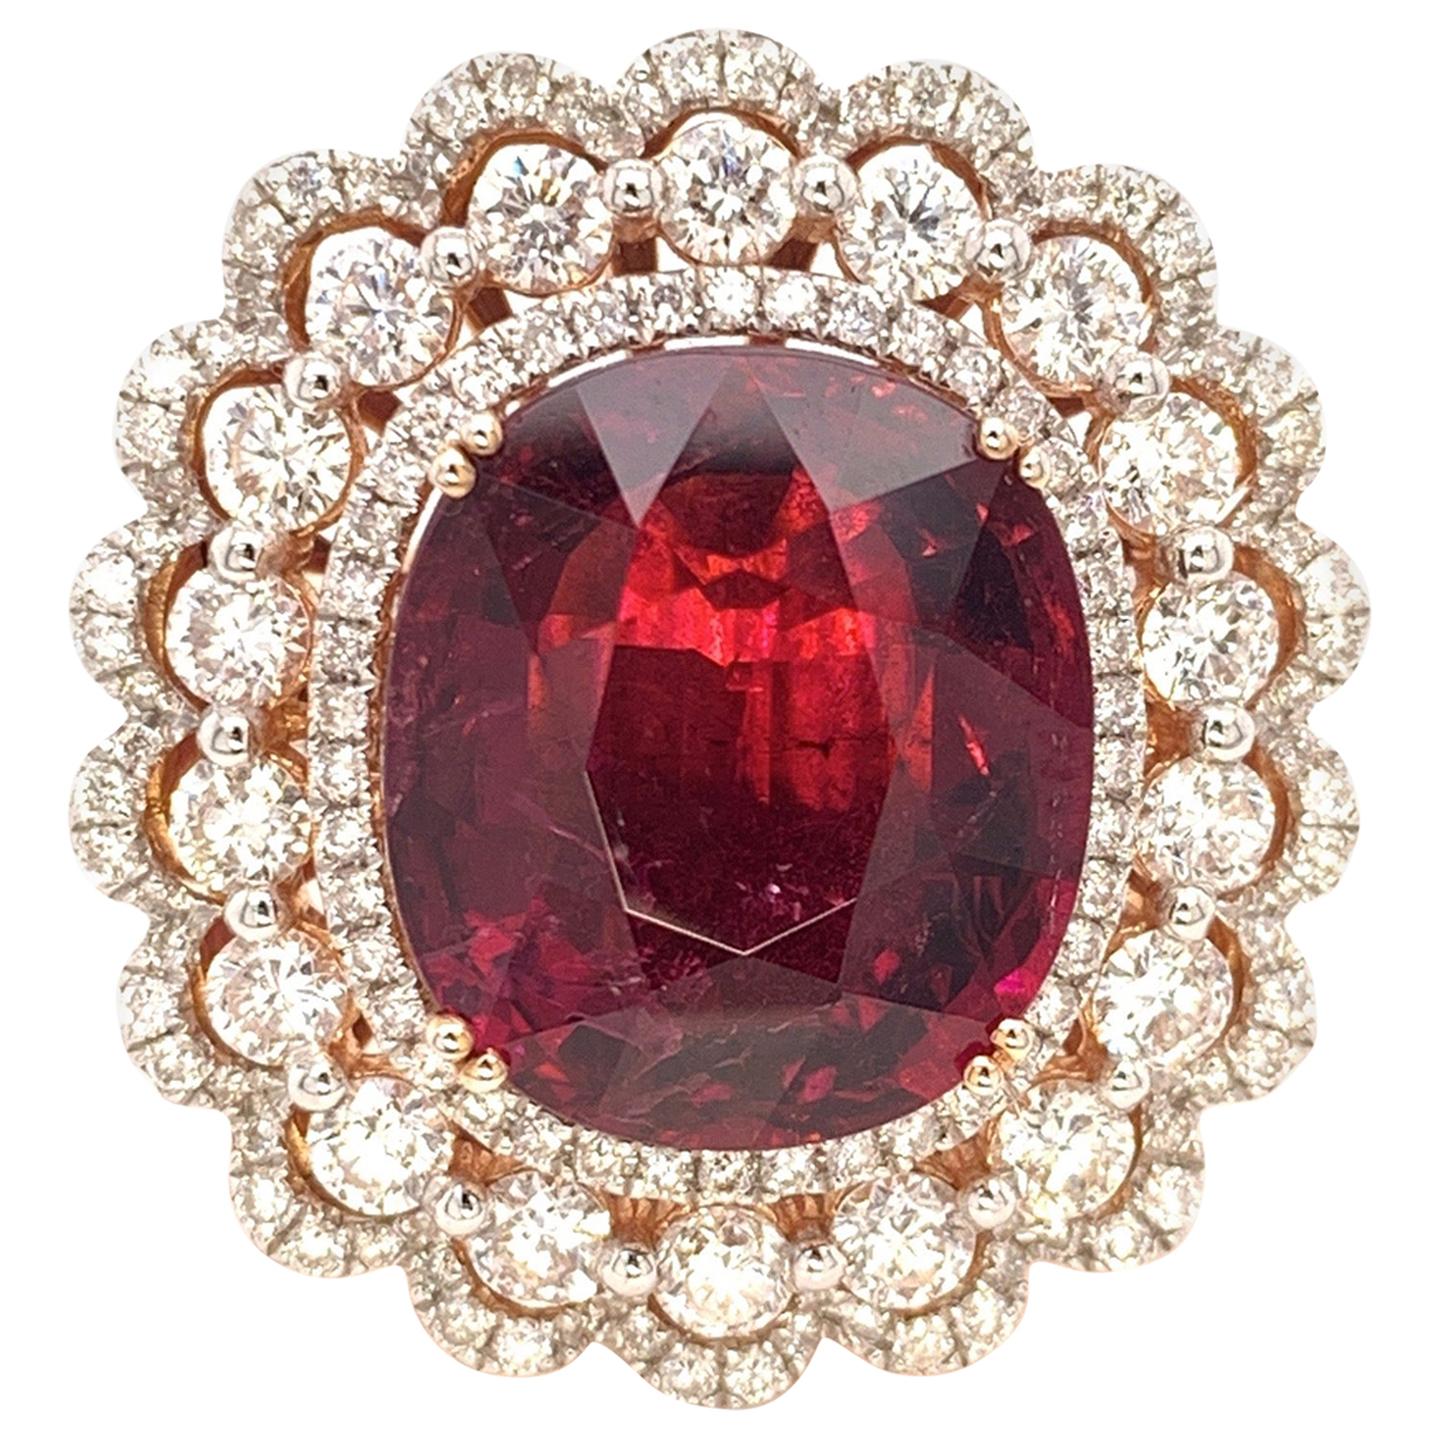 7.87 Carat Tourmaline 'Rubellite' Cocktail Ring For Sale